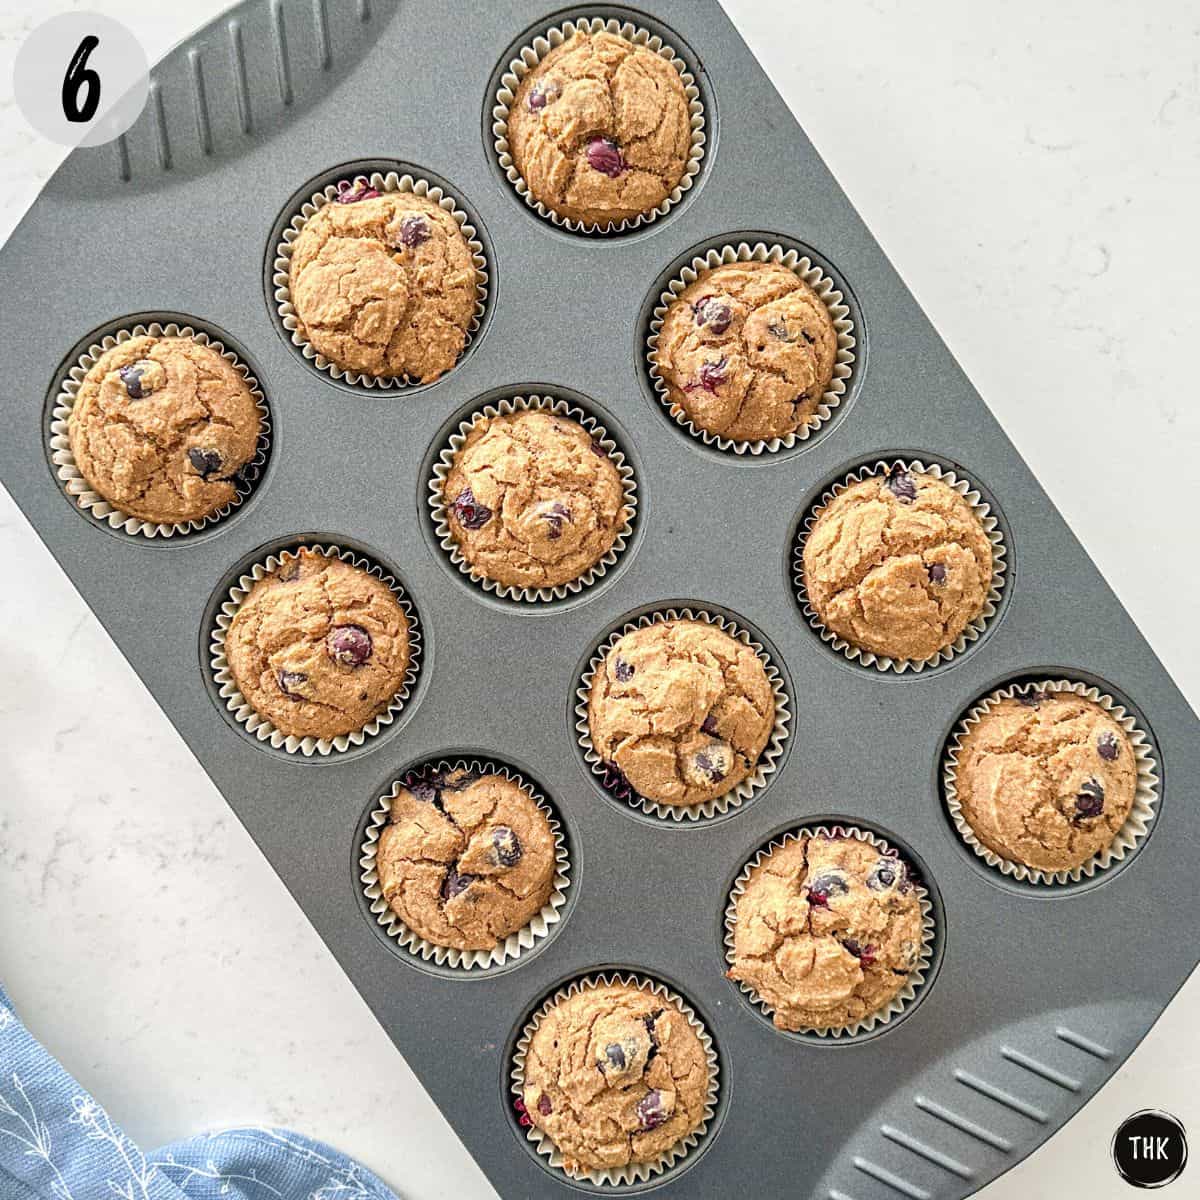 Baked banana lentil muffins in muffin pan.